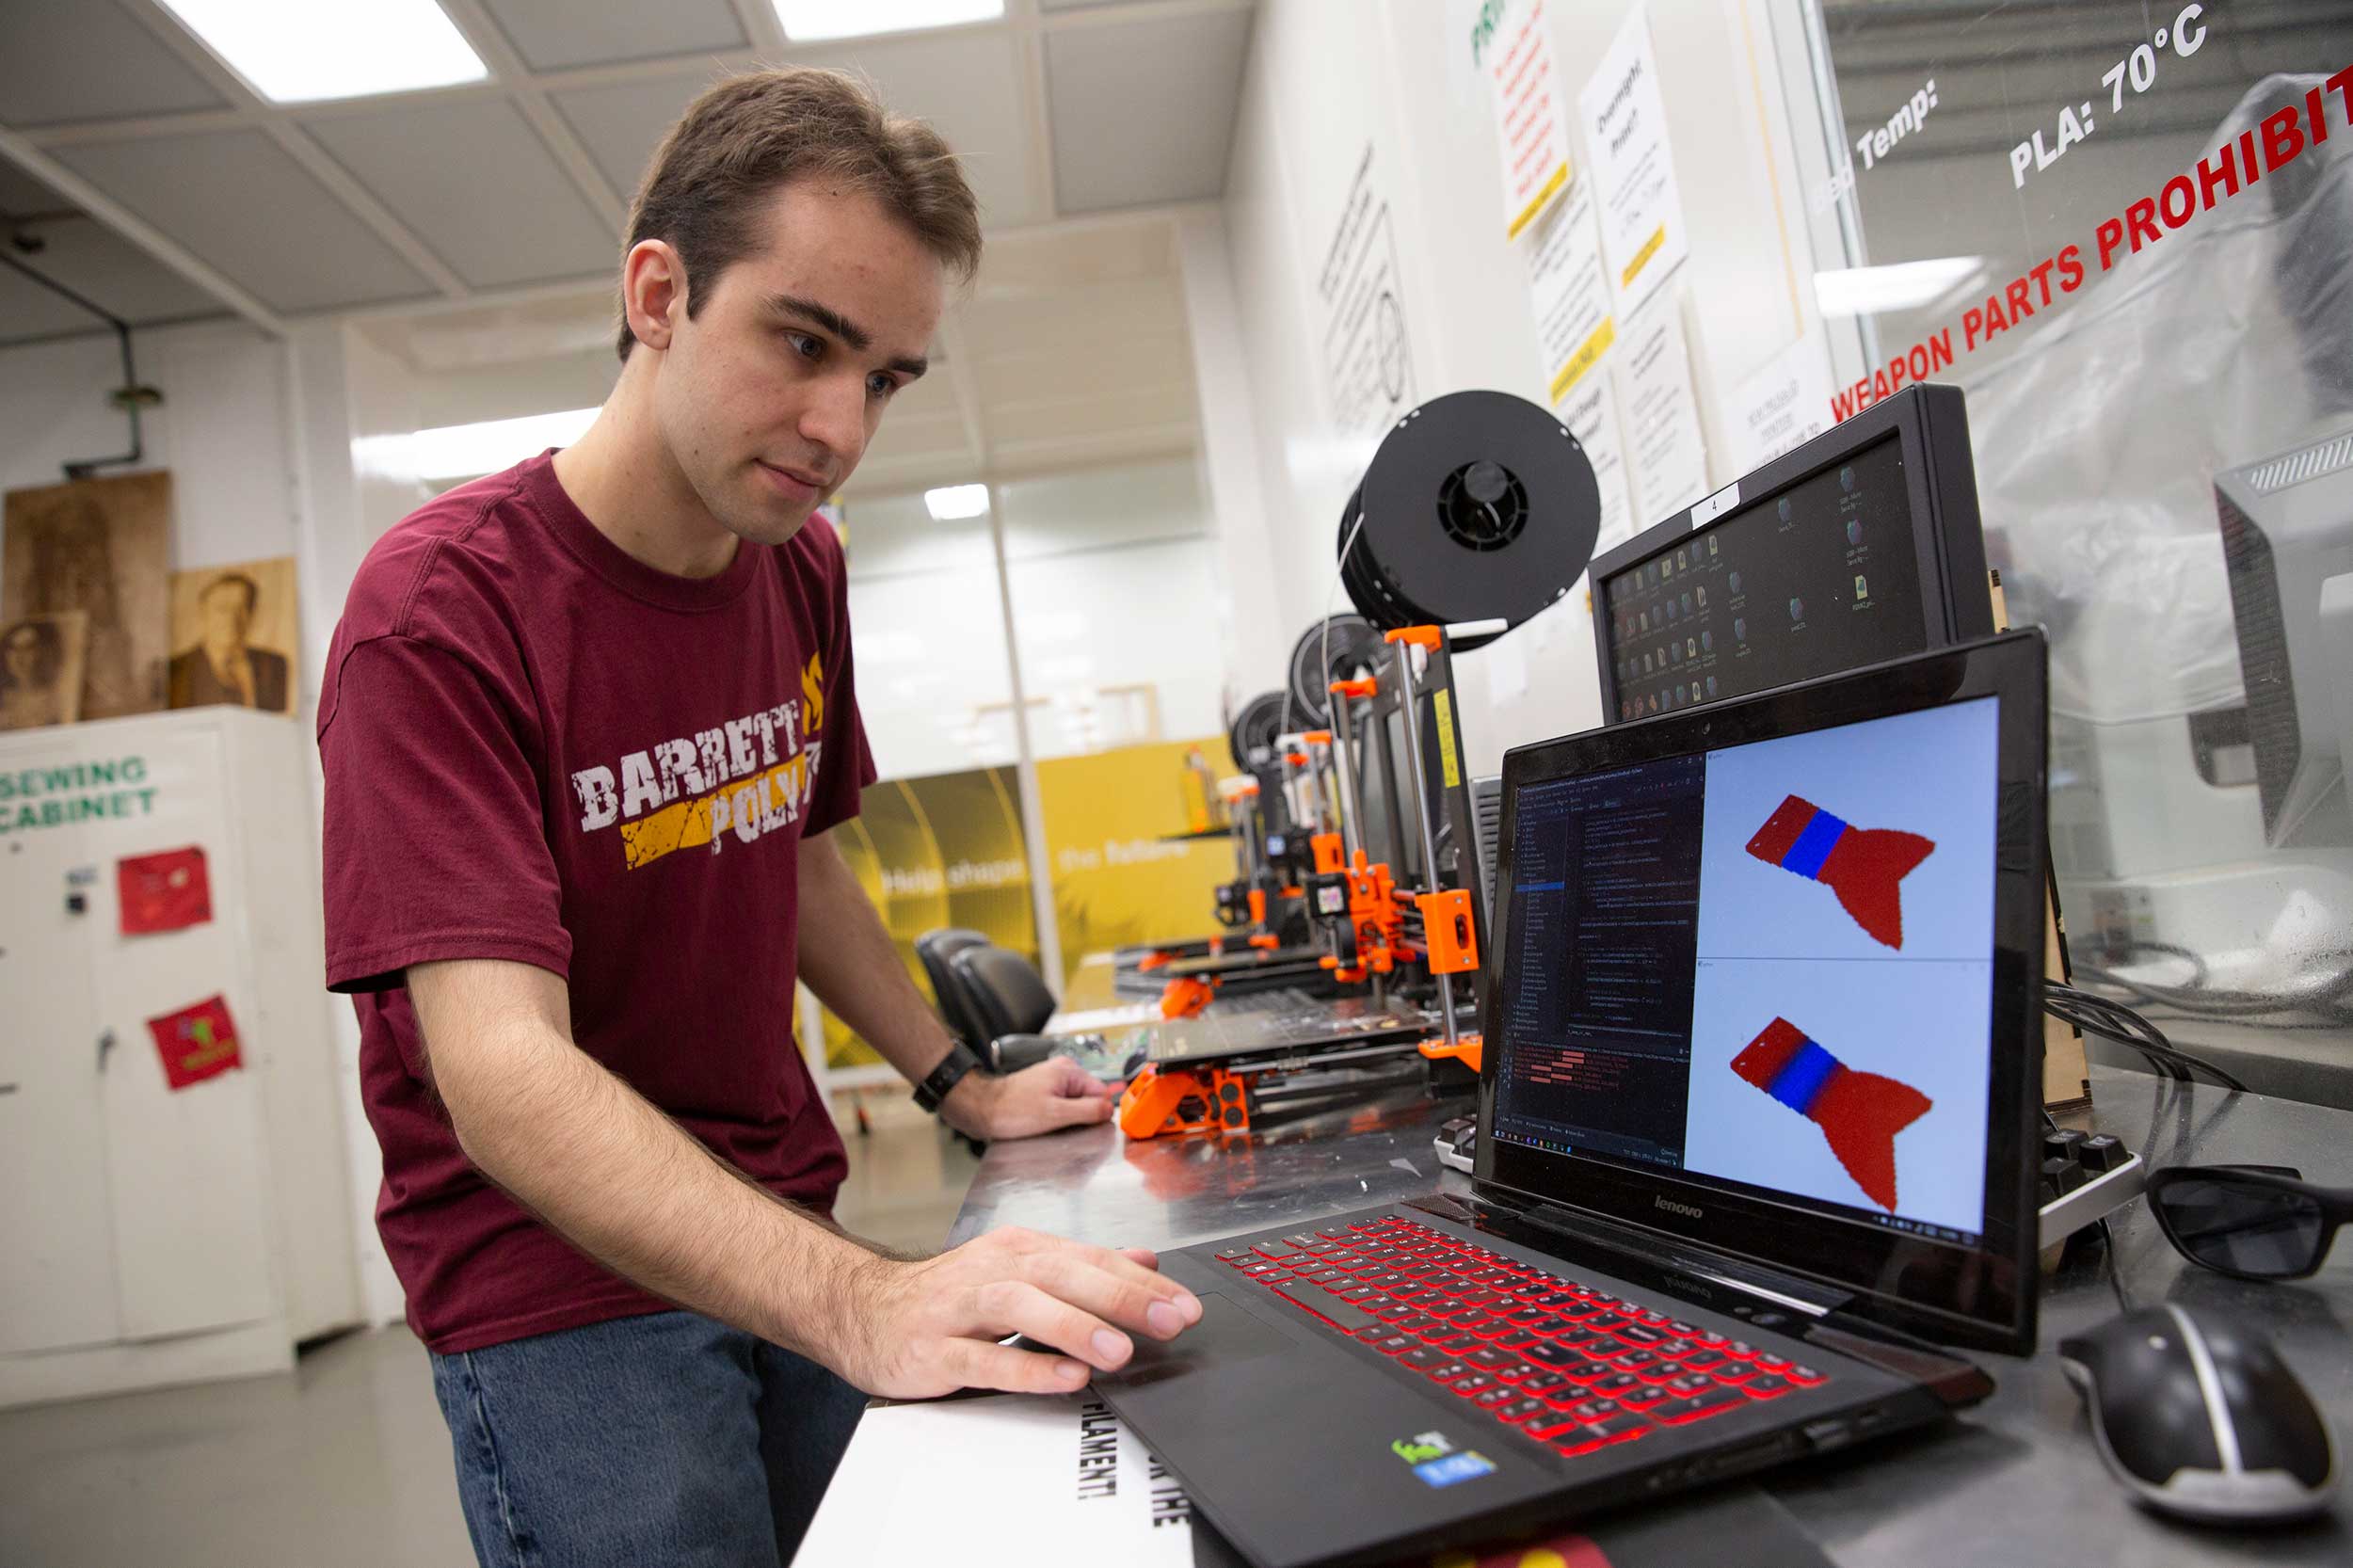 An ASU Engineering student works on a project a lab